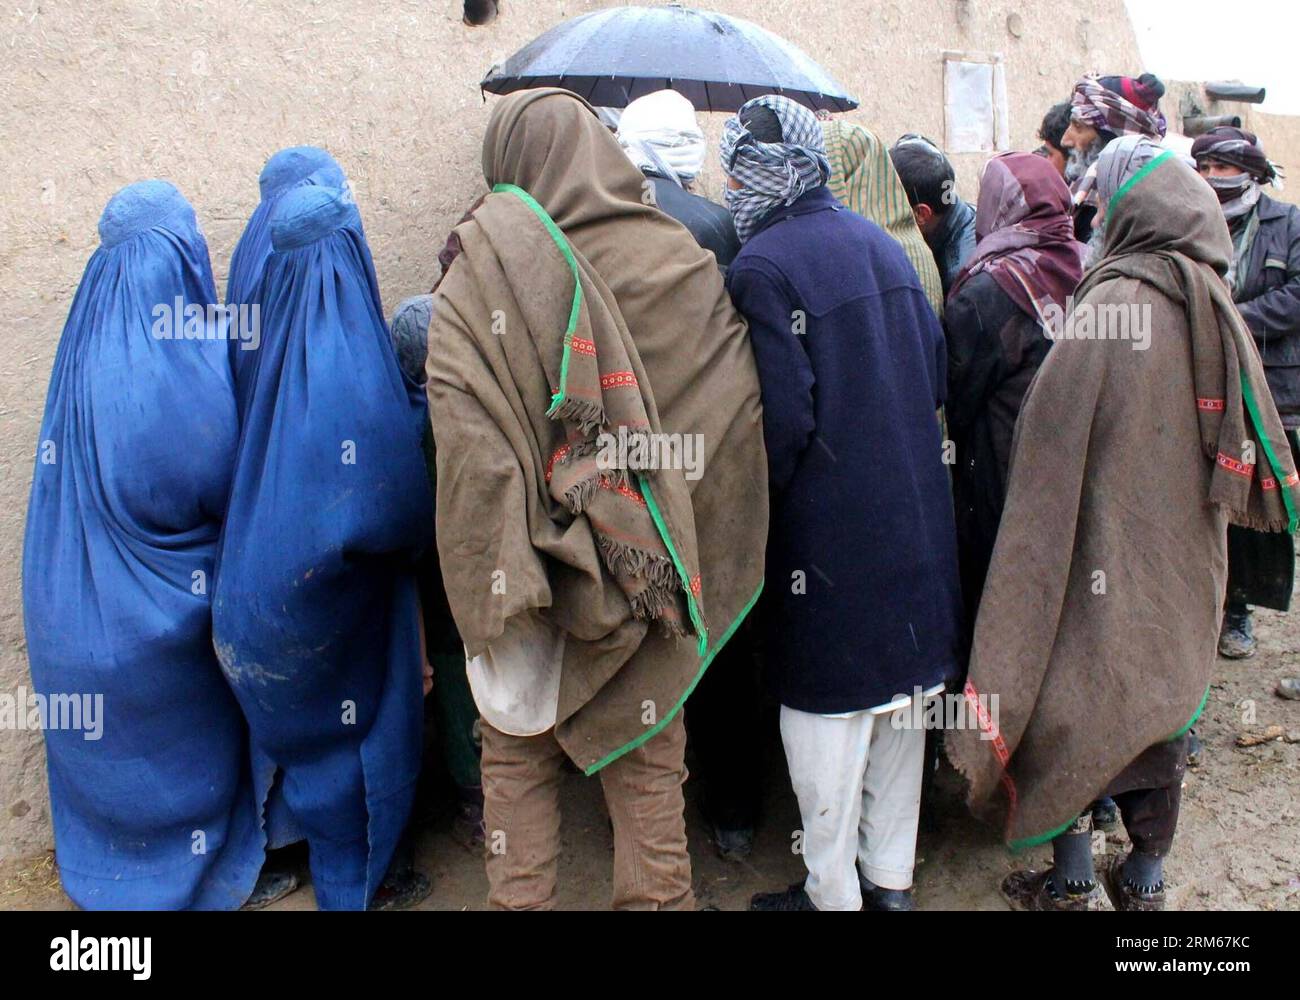 Bildnummer: 60834288  Datum: 16.12.2013  Copyright: imago/Xinhua     (131216) -- BALKH, Dec. 16, 2013 (Xinhua) -- Afghans wait to receive food donated by UNHCR in Balkh province of northern Afghanistan on Dec. 16, 2013.(Xinhua/Azorda) AFGHANISTAN-BALKH-FOOD DISTRIBUTION PUBLICATIONxNOTxINxCHN xcb x0x 2013 quer Stock Photo